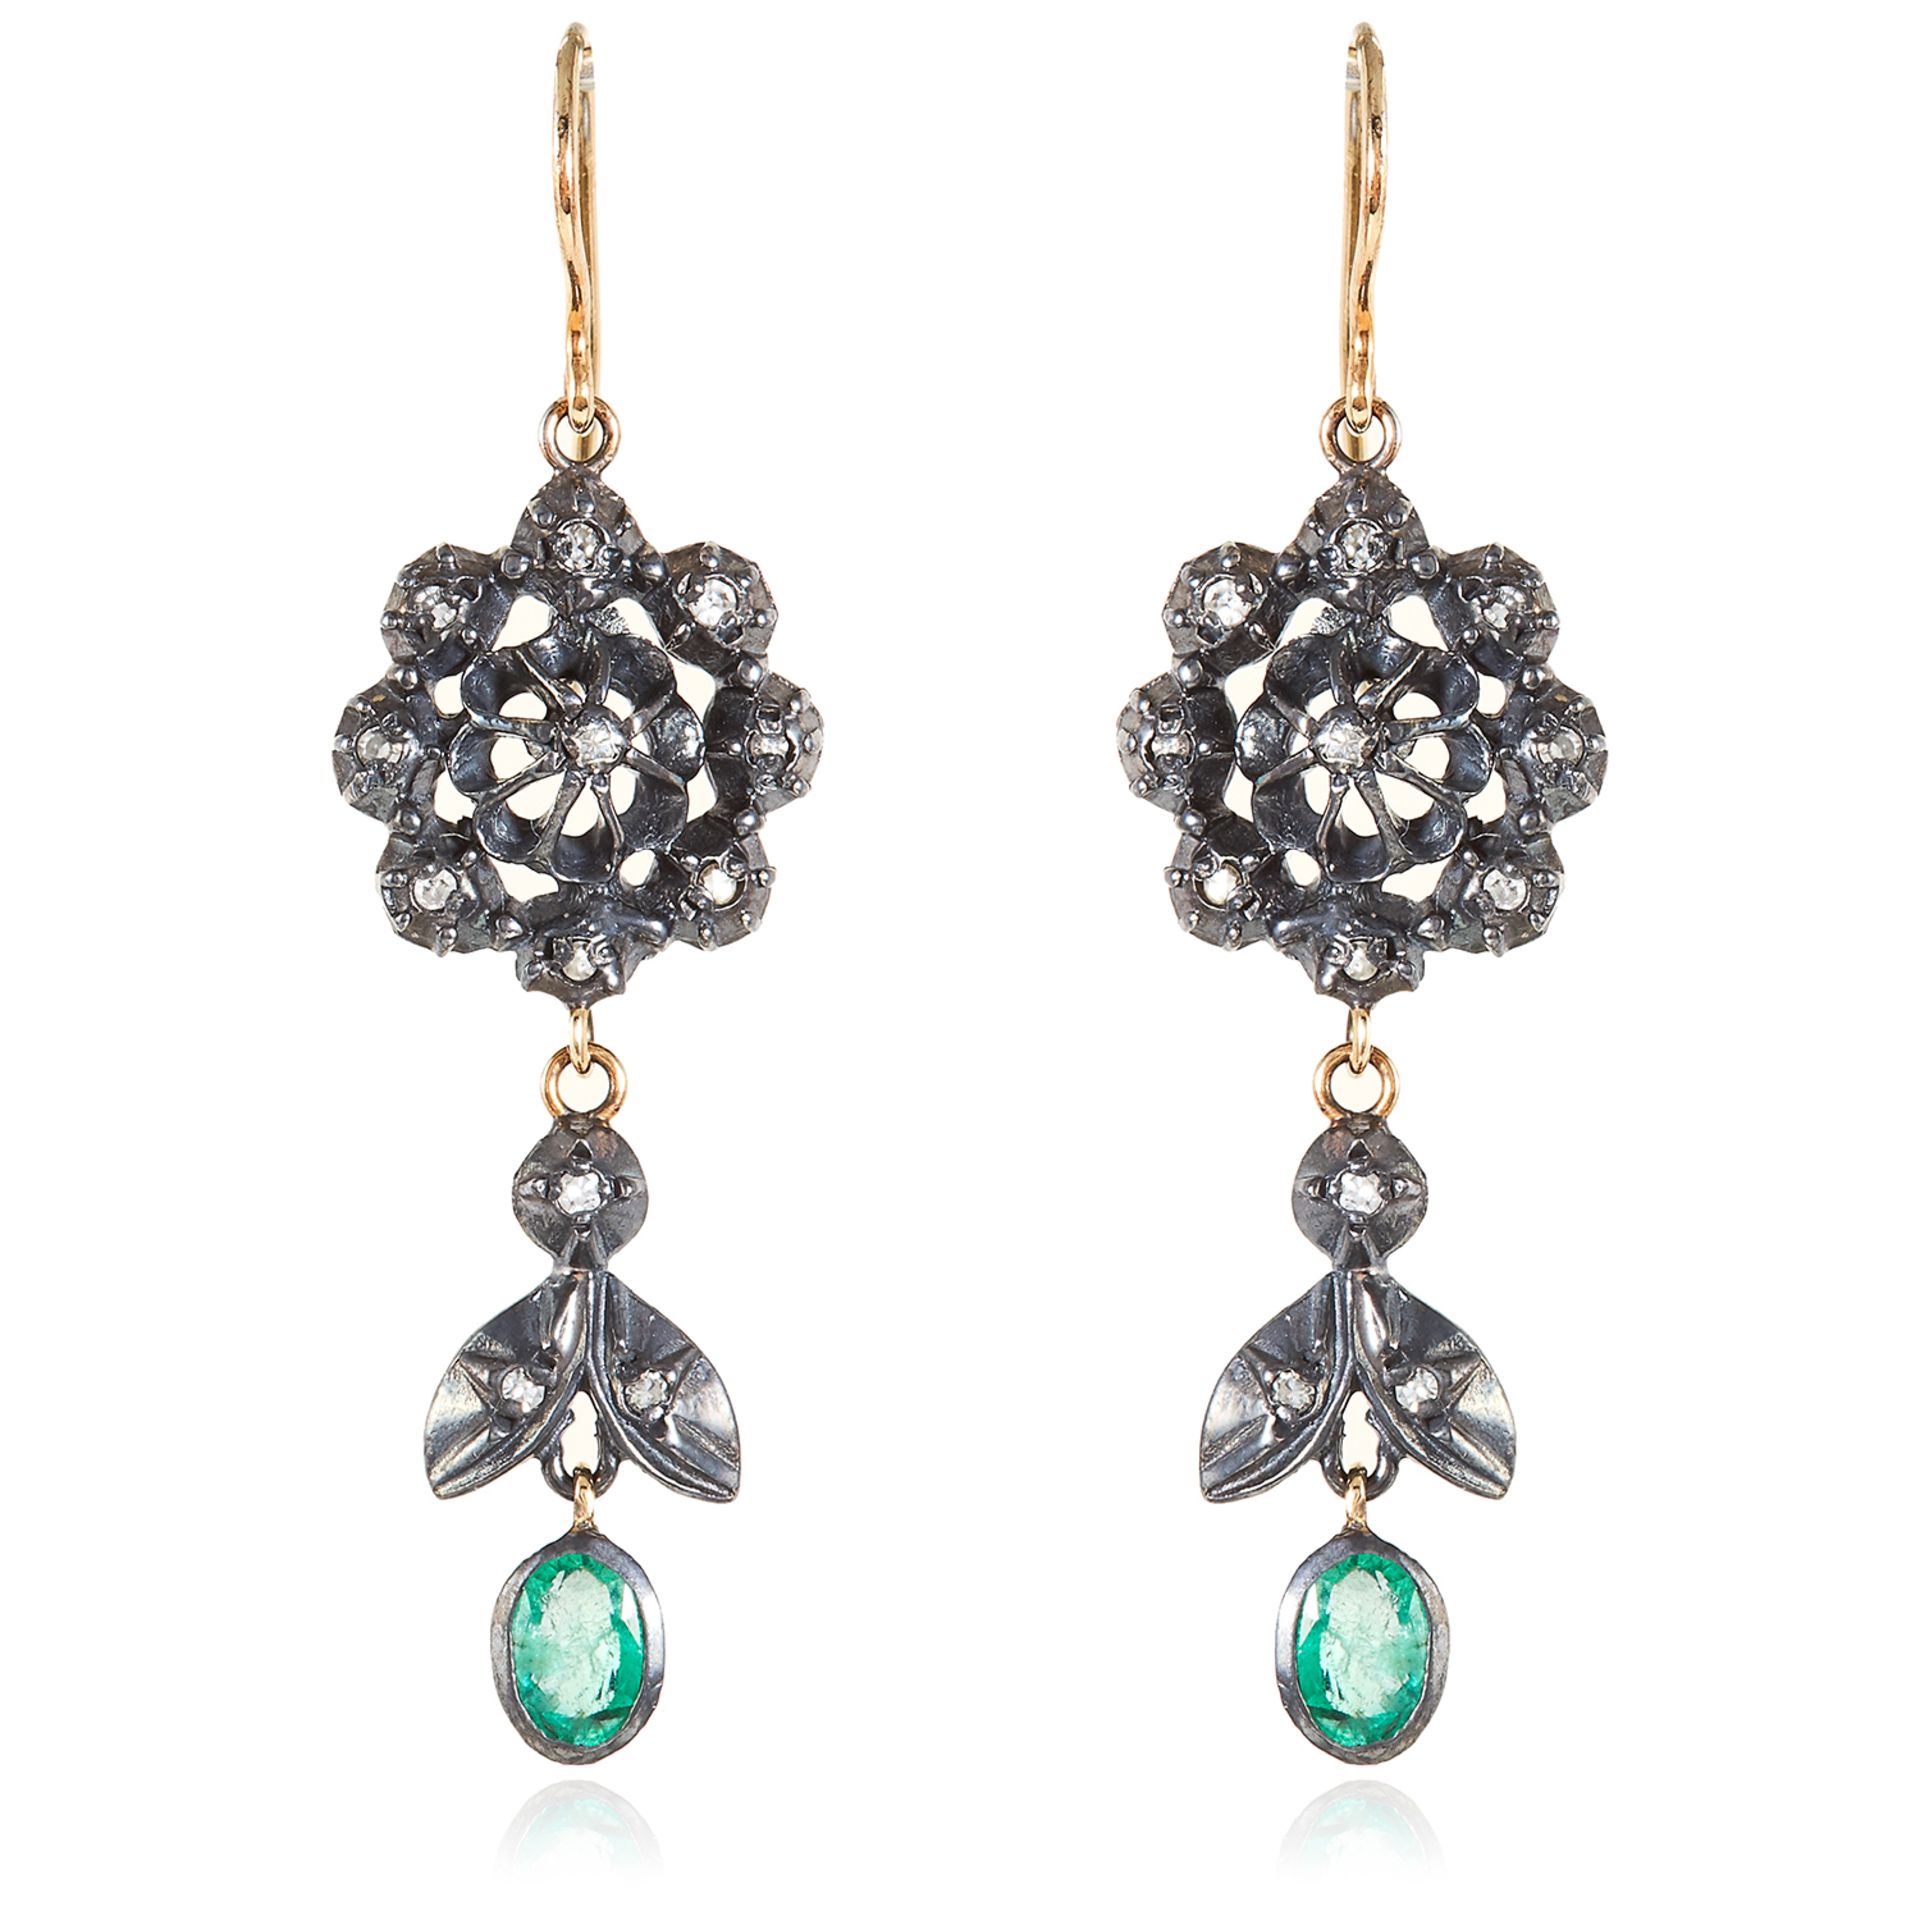 A PAIR OF ANTIQUE EMERALD AND DIAMOND DROP EARRINGS in yellow gold and silver, the floral diamond